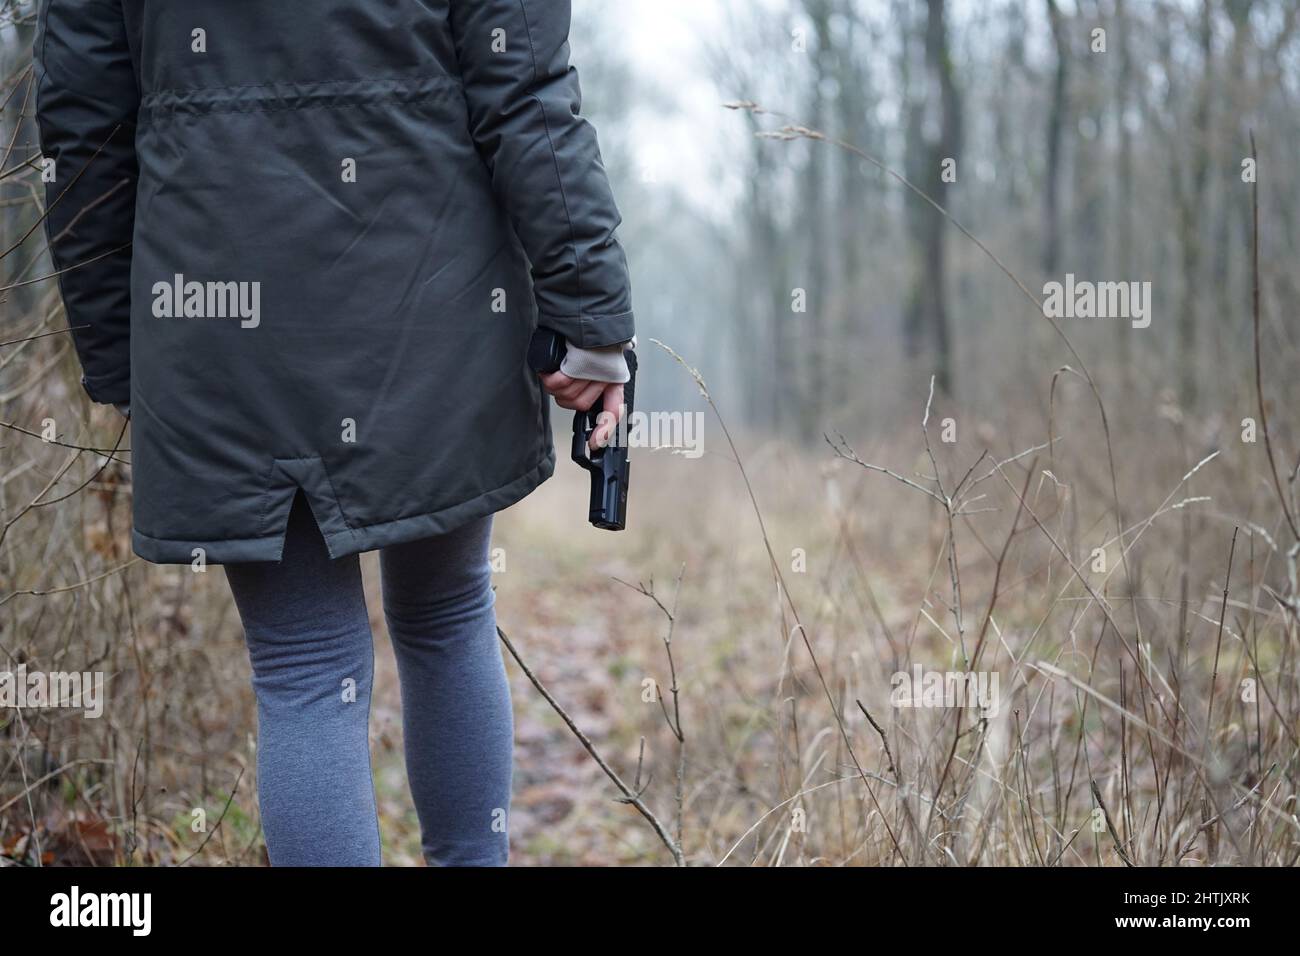 Woman with a gun in a forest Stock Photo